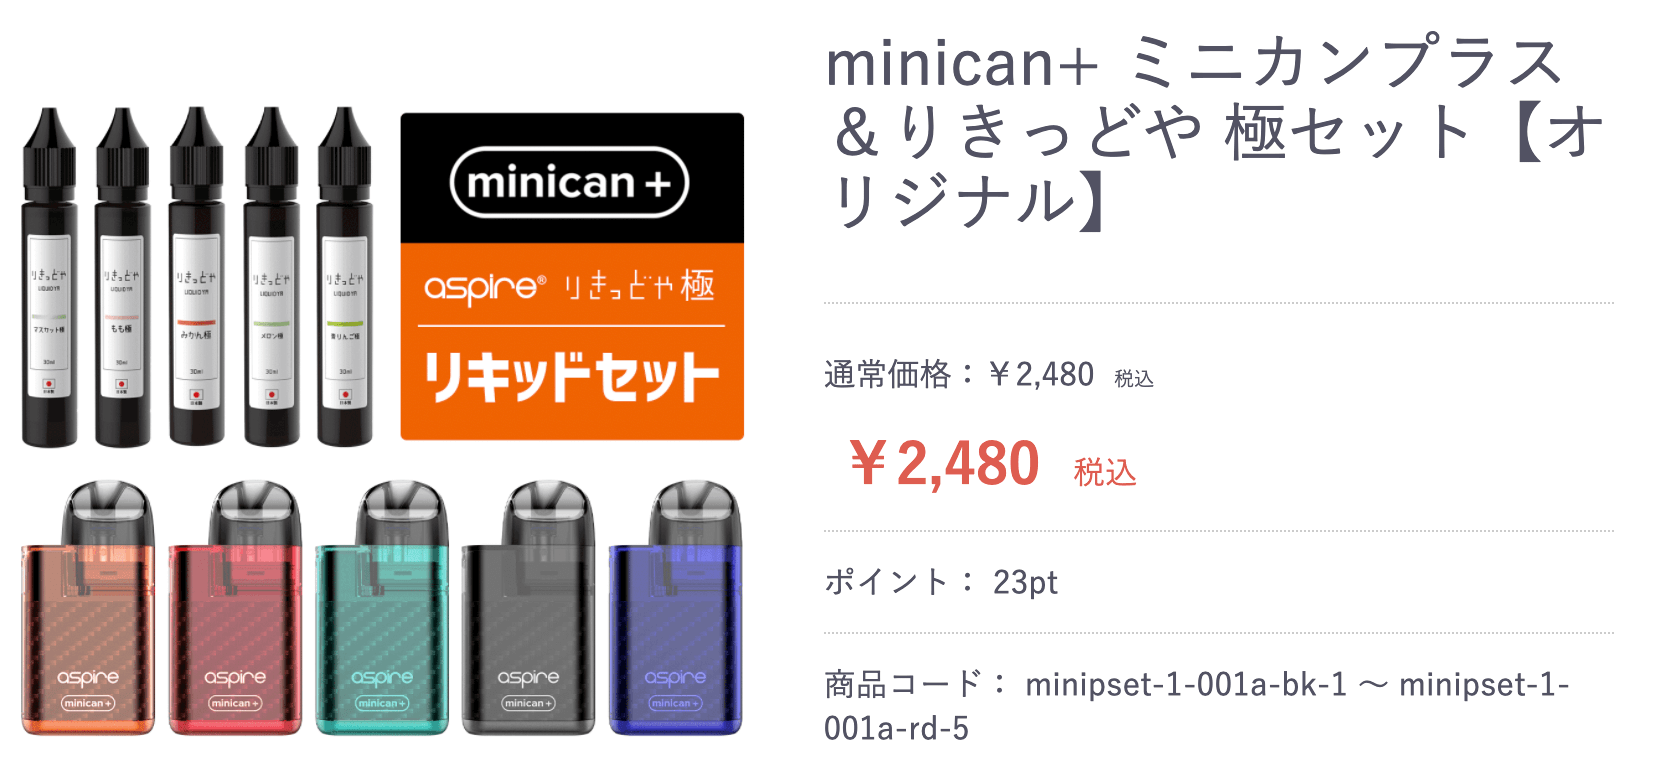 minicanプラス　リキッドセット